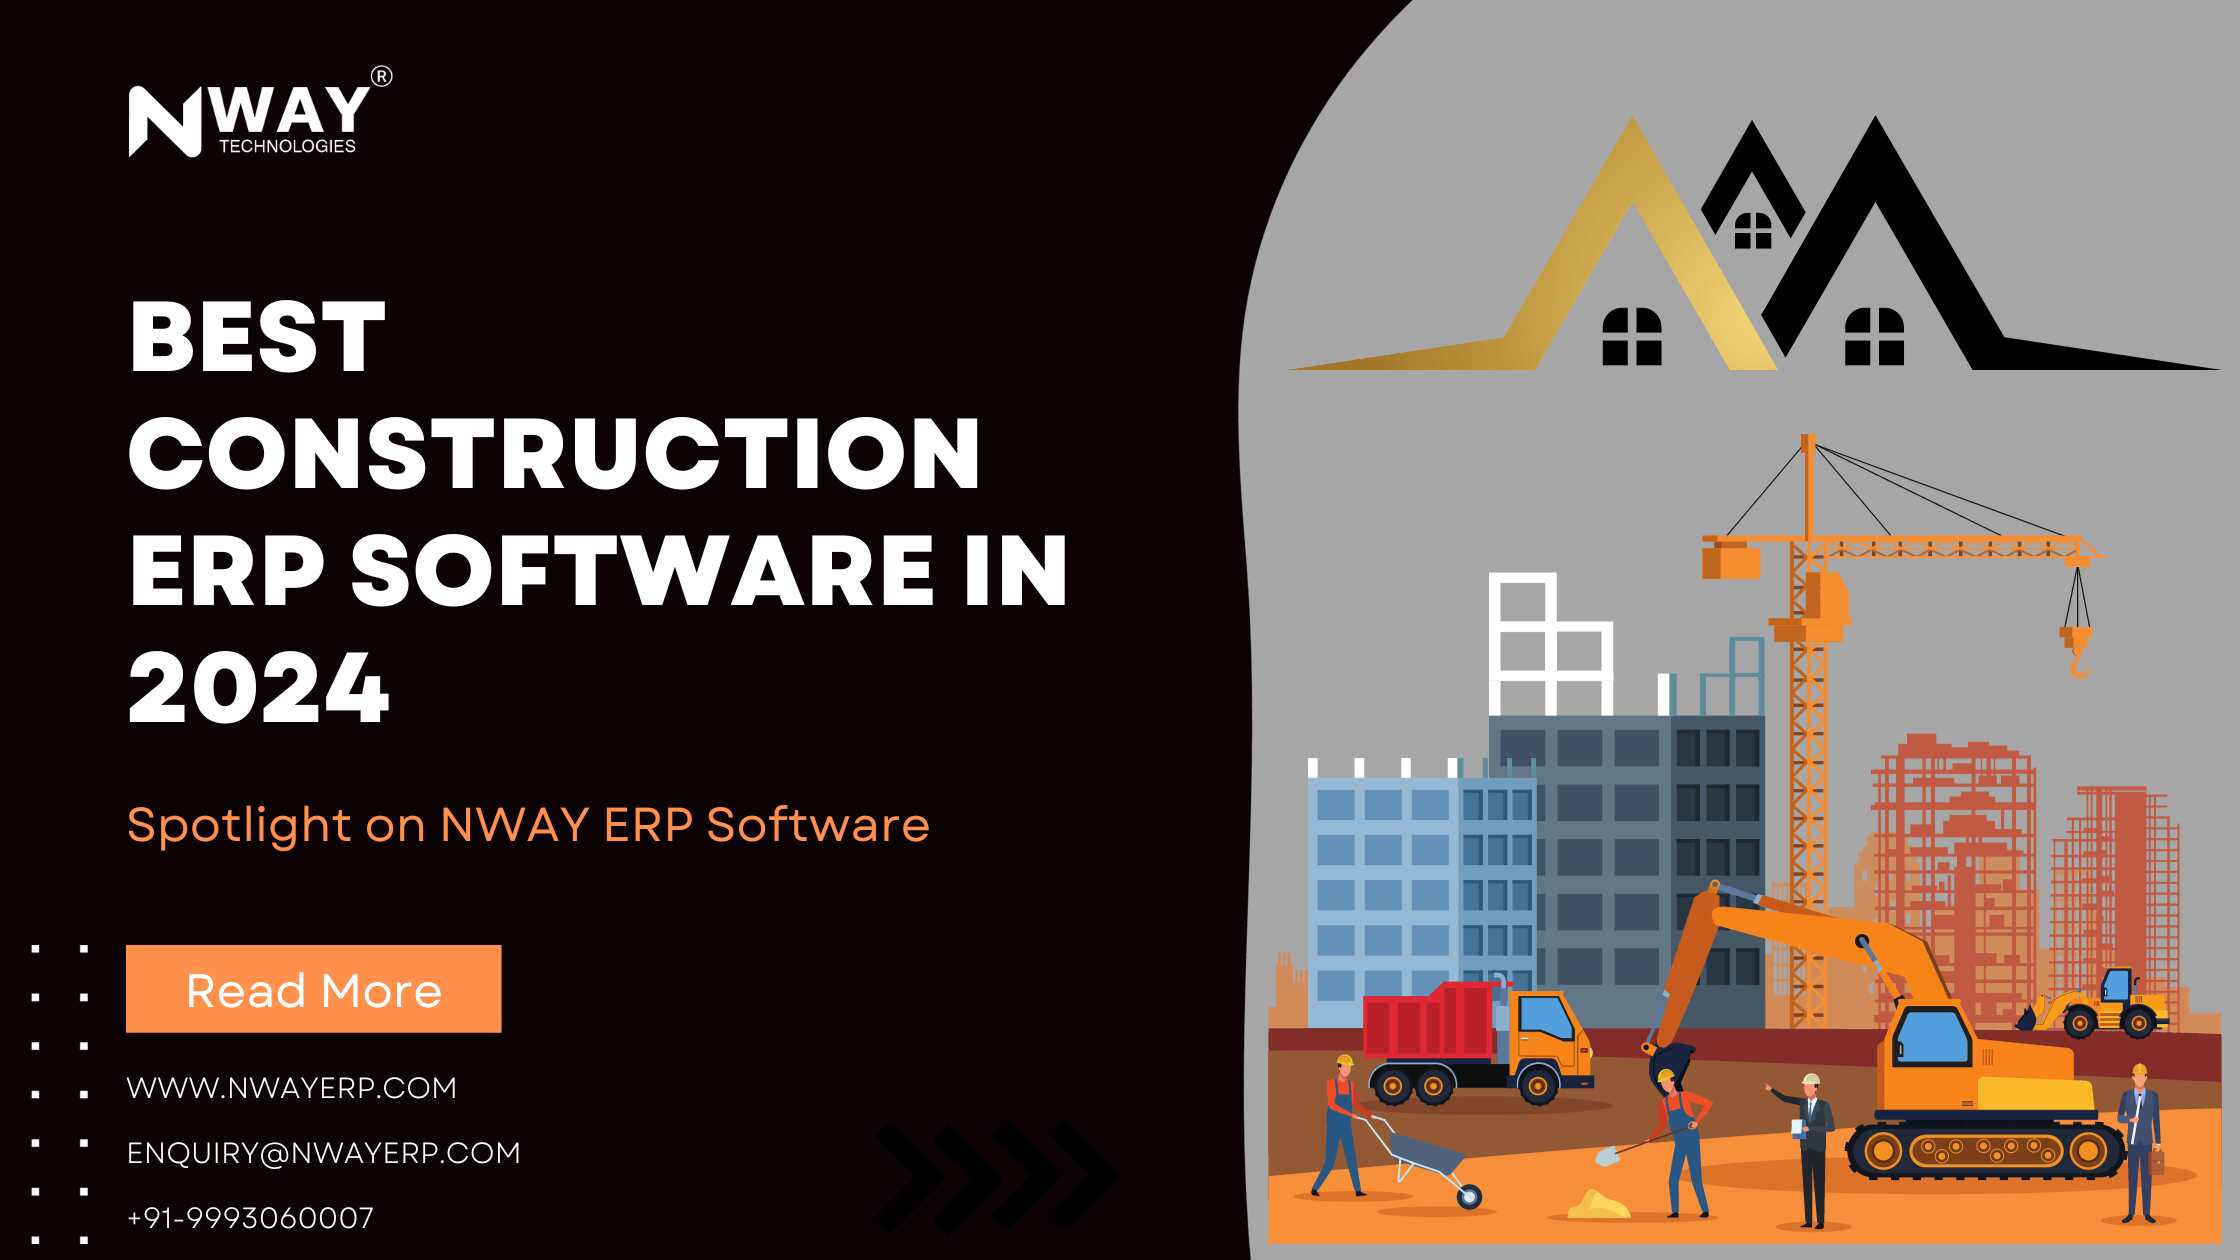 NWAY ERP: Best Construction ERP Software in 2024